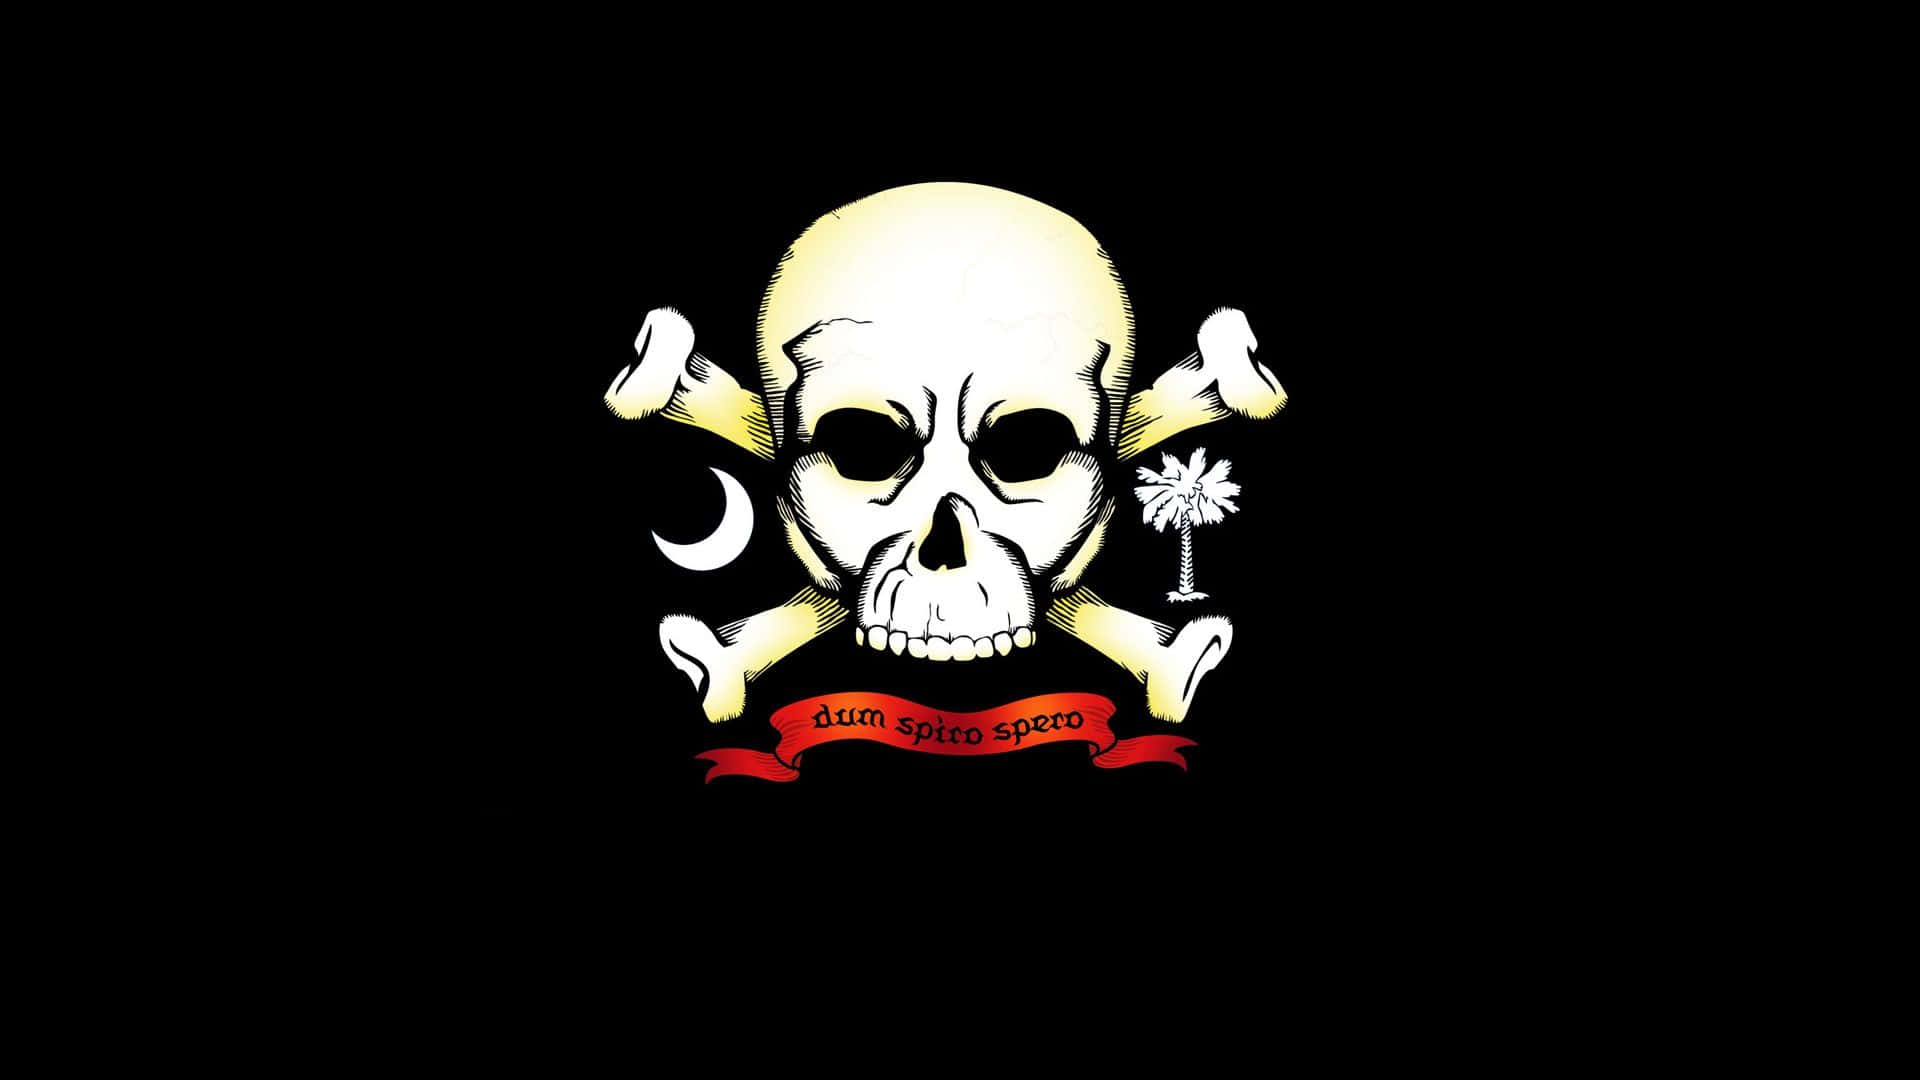 An Iconic Skull And Crossbones Symbol Background